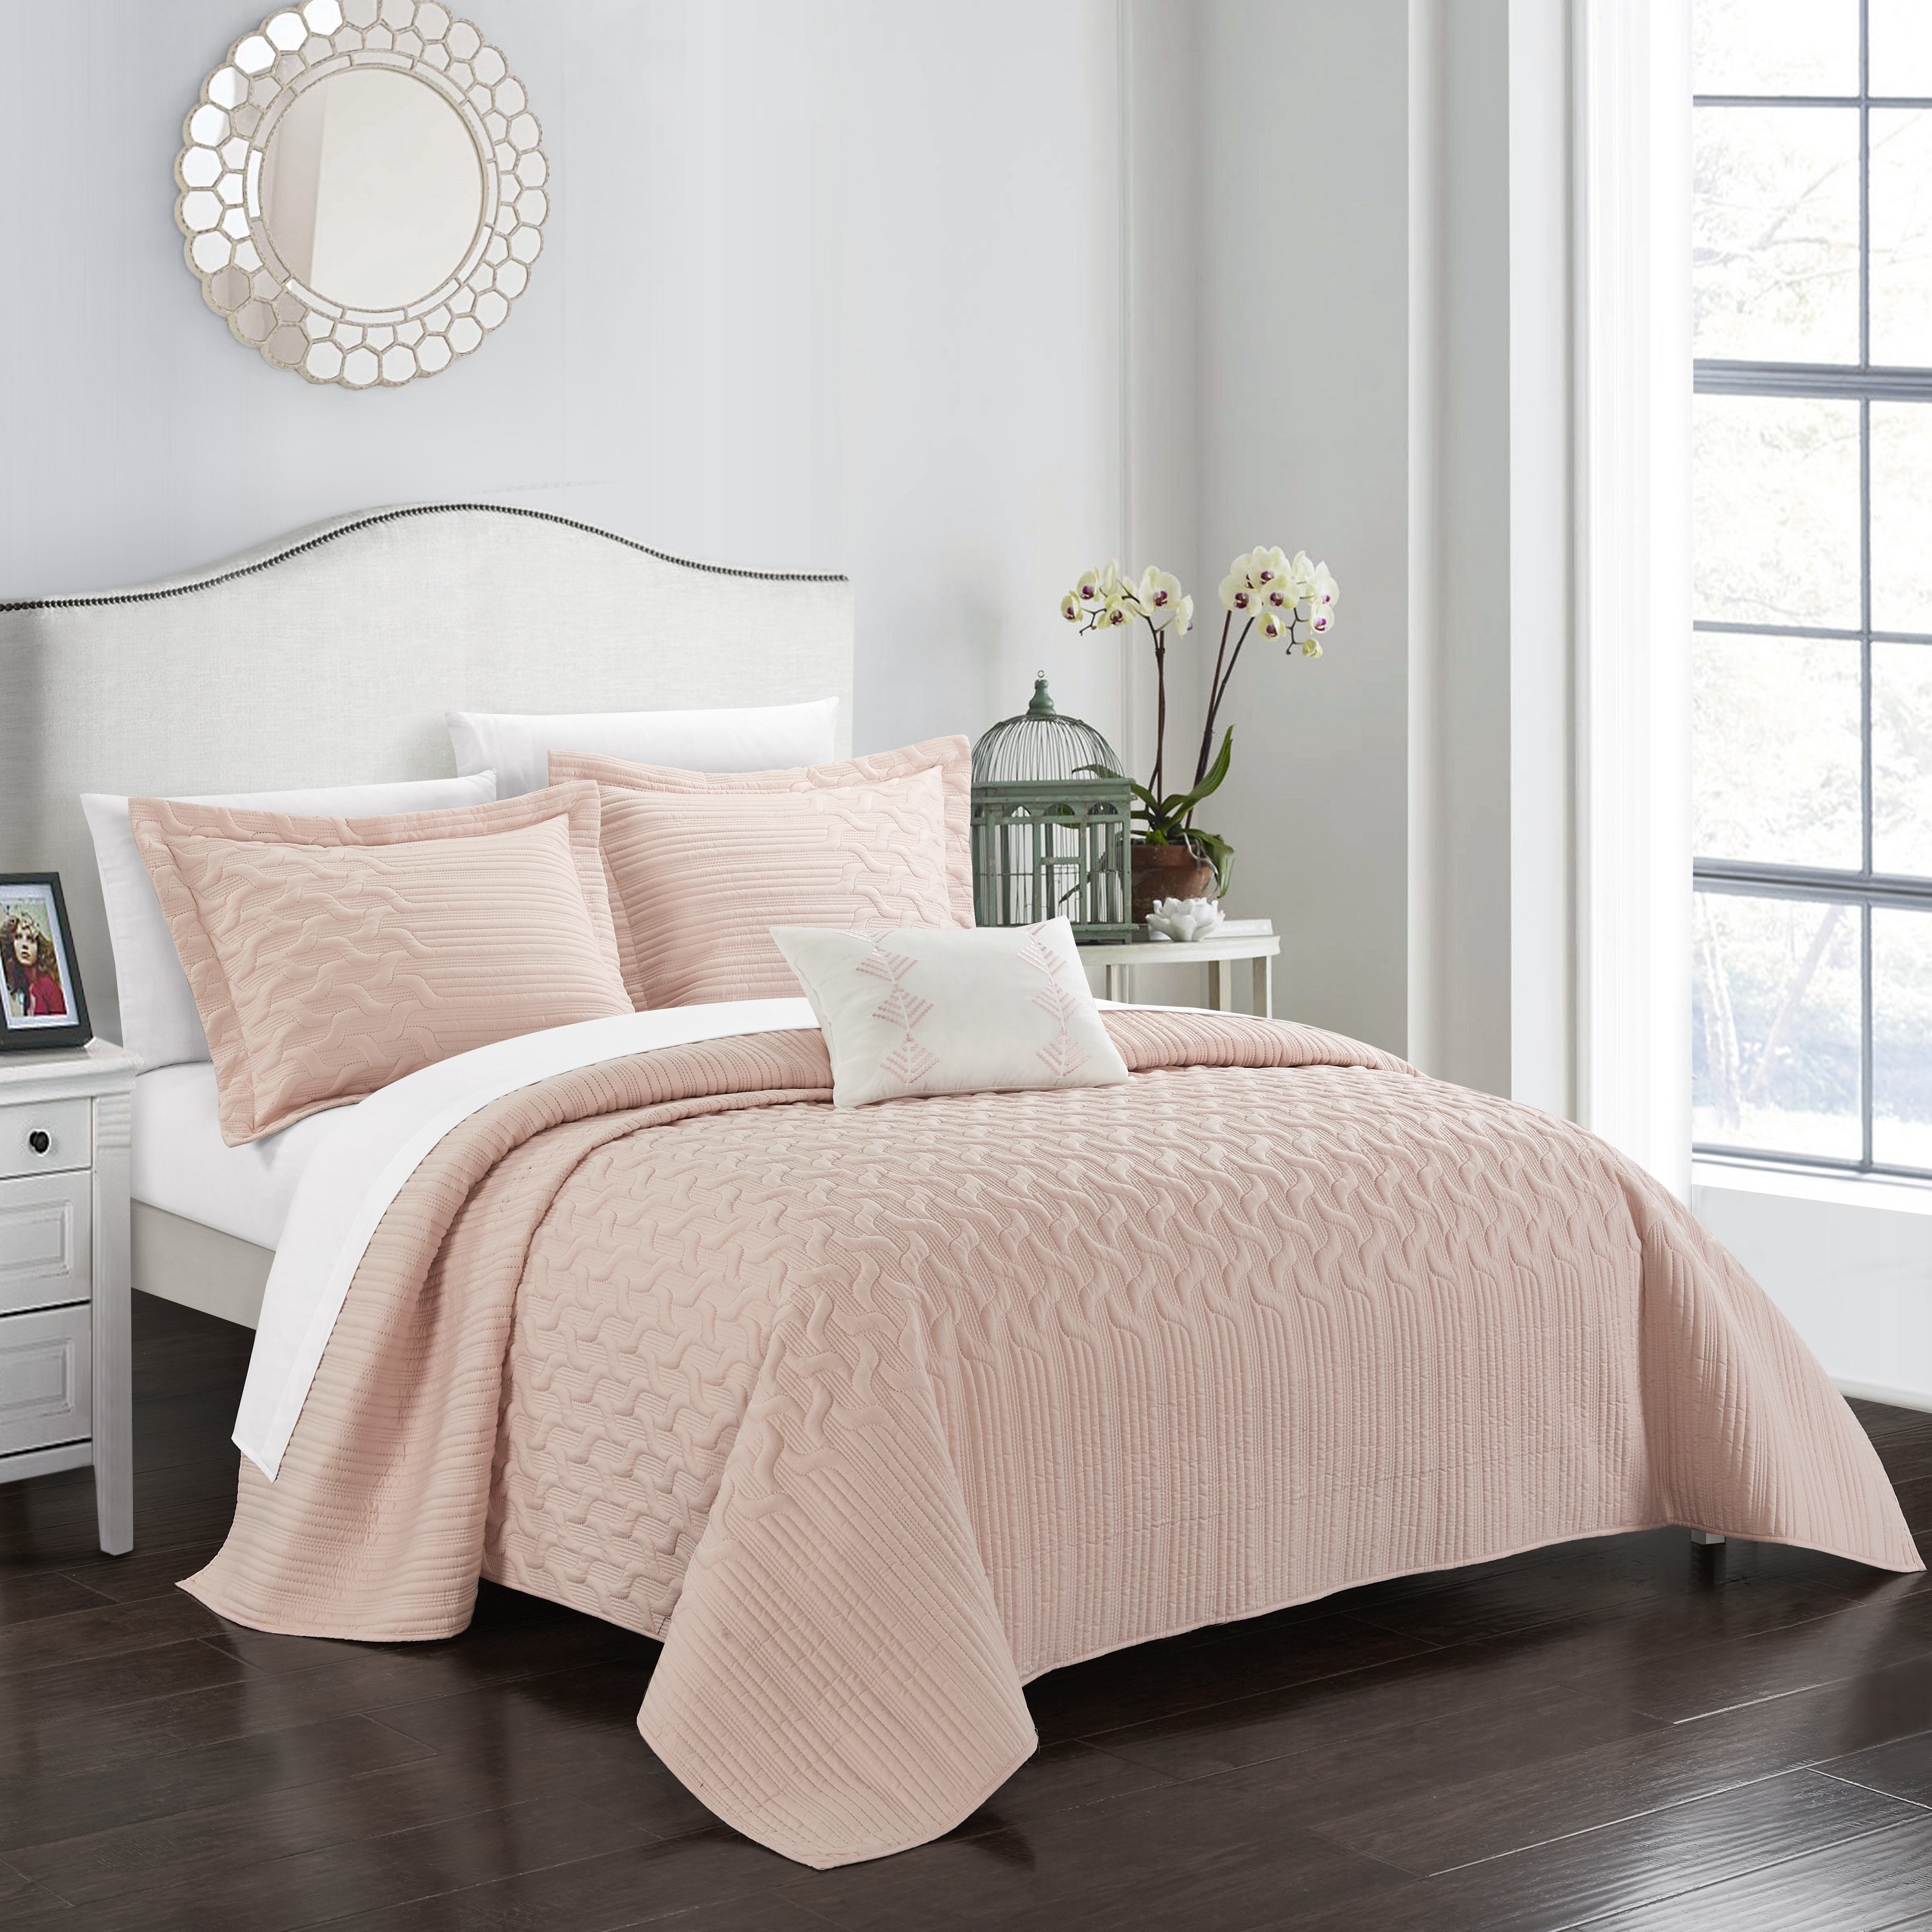 Shaliya 4 Or 3 Piece Quilt Cover Set Interlaced Vine Pattern Quilted Bed In A Bag - Blush, Queen